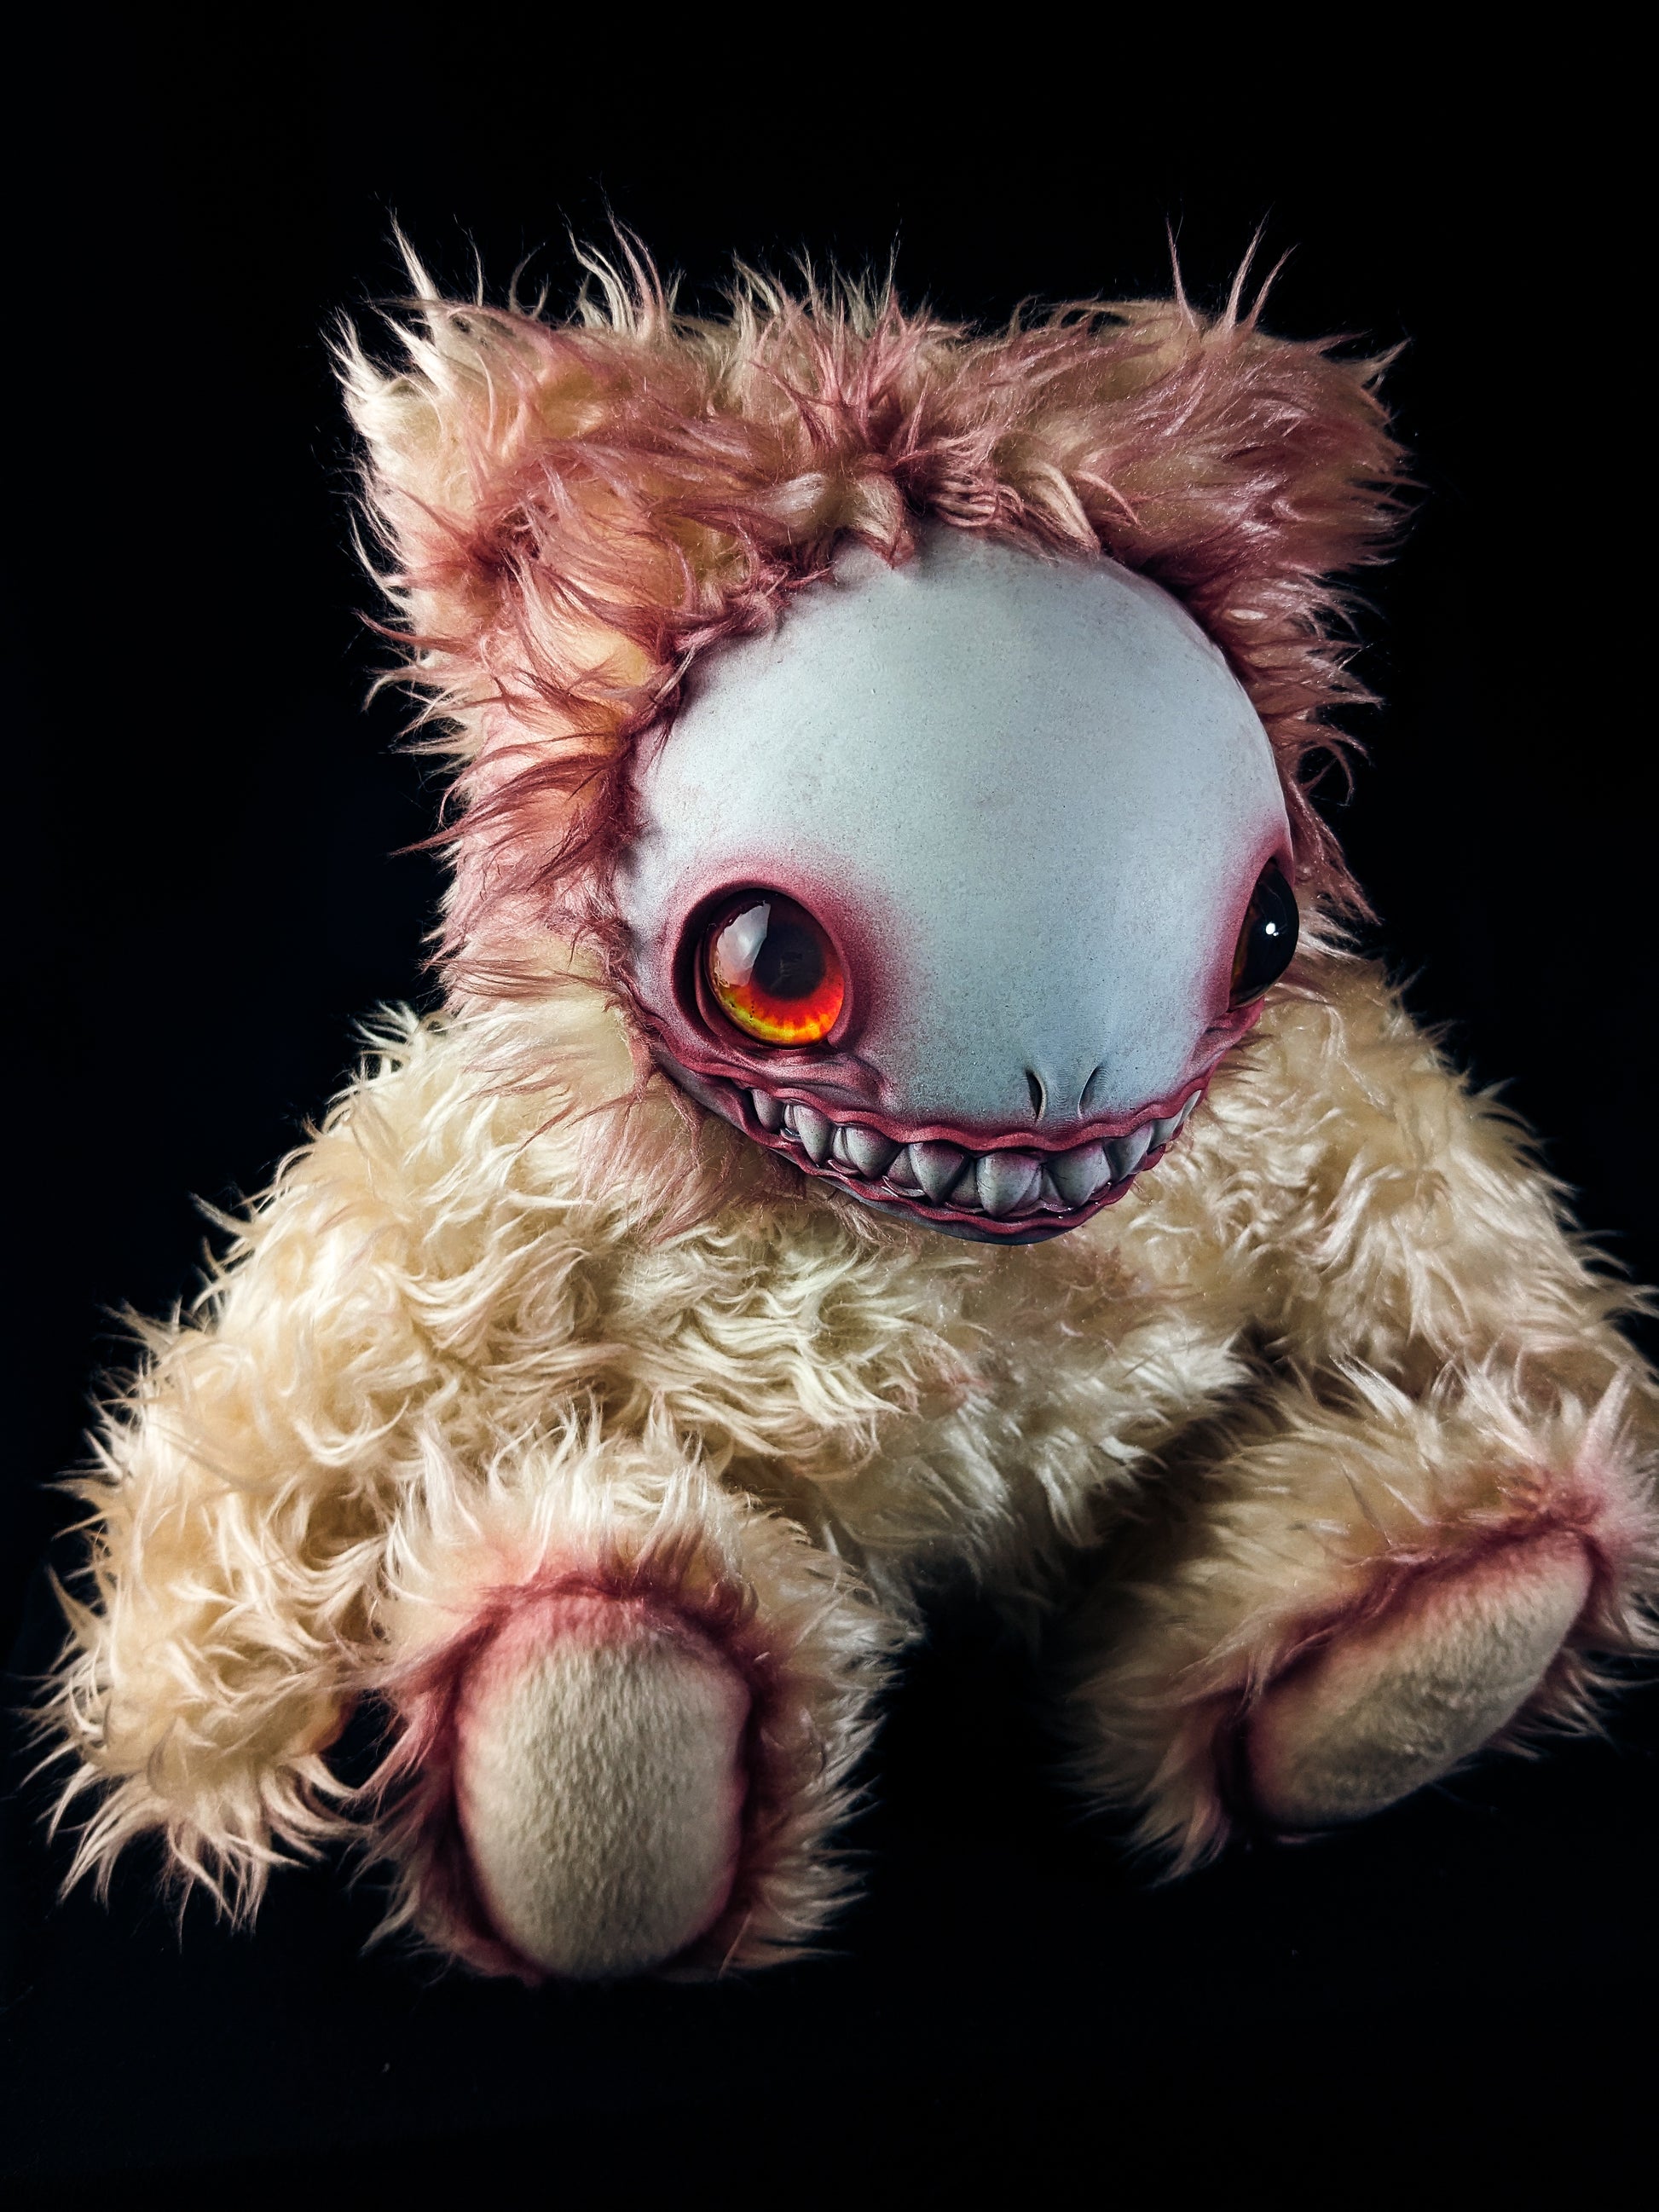 Bloody Gaze: FRIEND - CRYPTCRITZ Handcrafted Alien Art Doll Plush Toy for Cosmic Dreamers